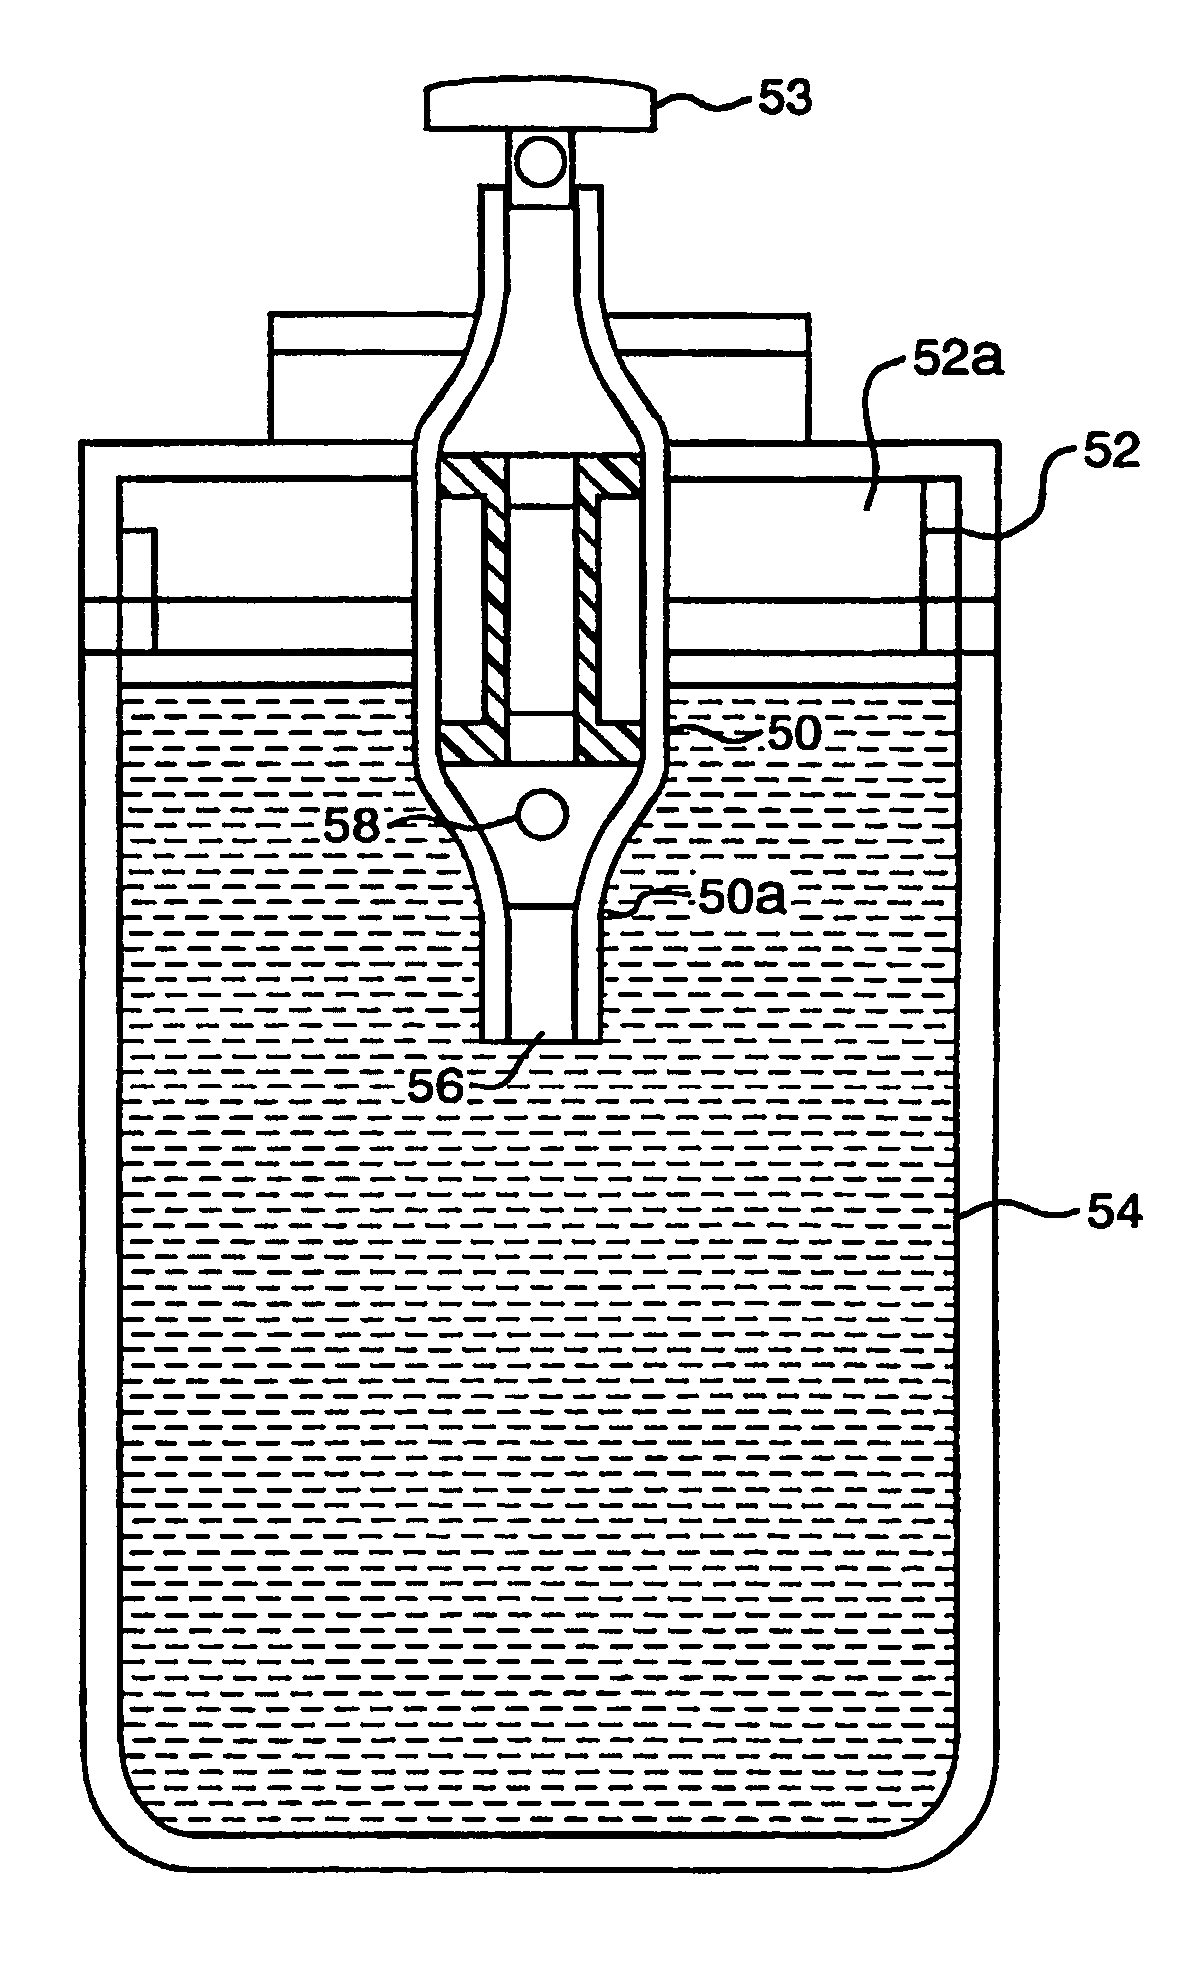 UV LED based water purification module for intermittently operable flow-through hydration systems